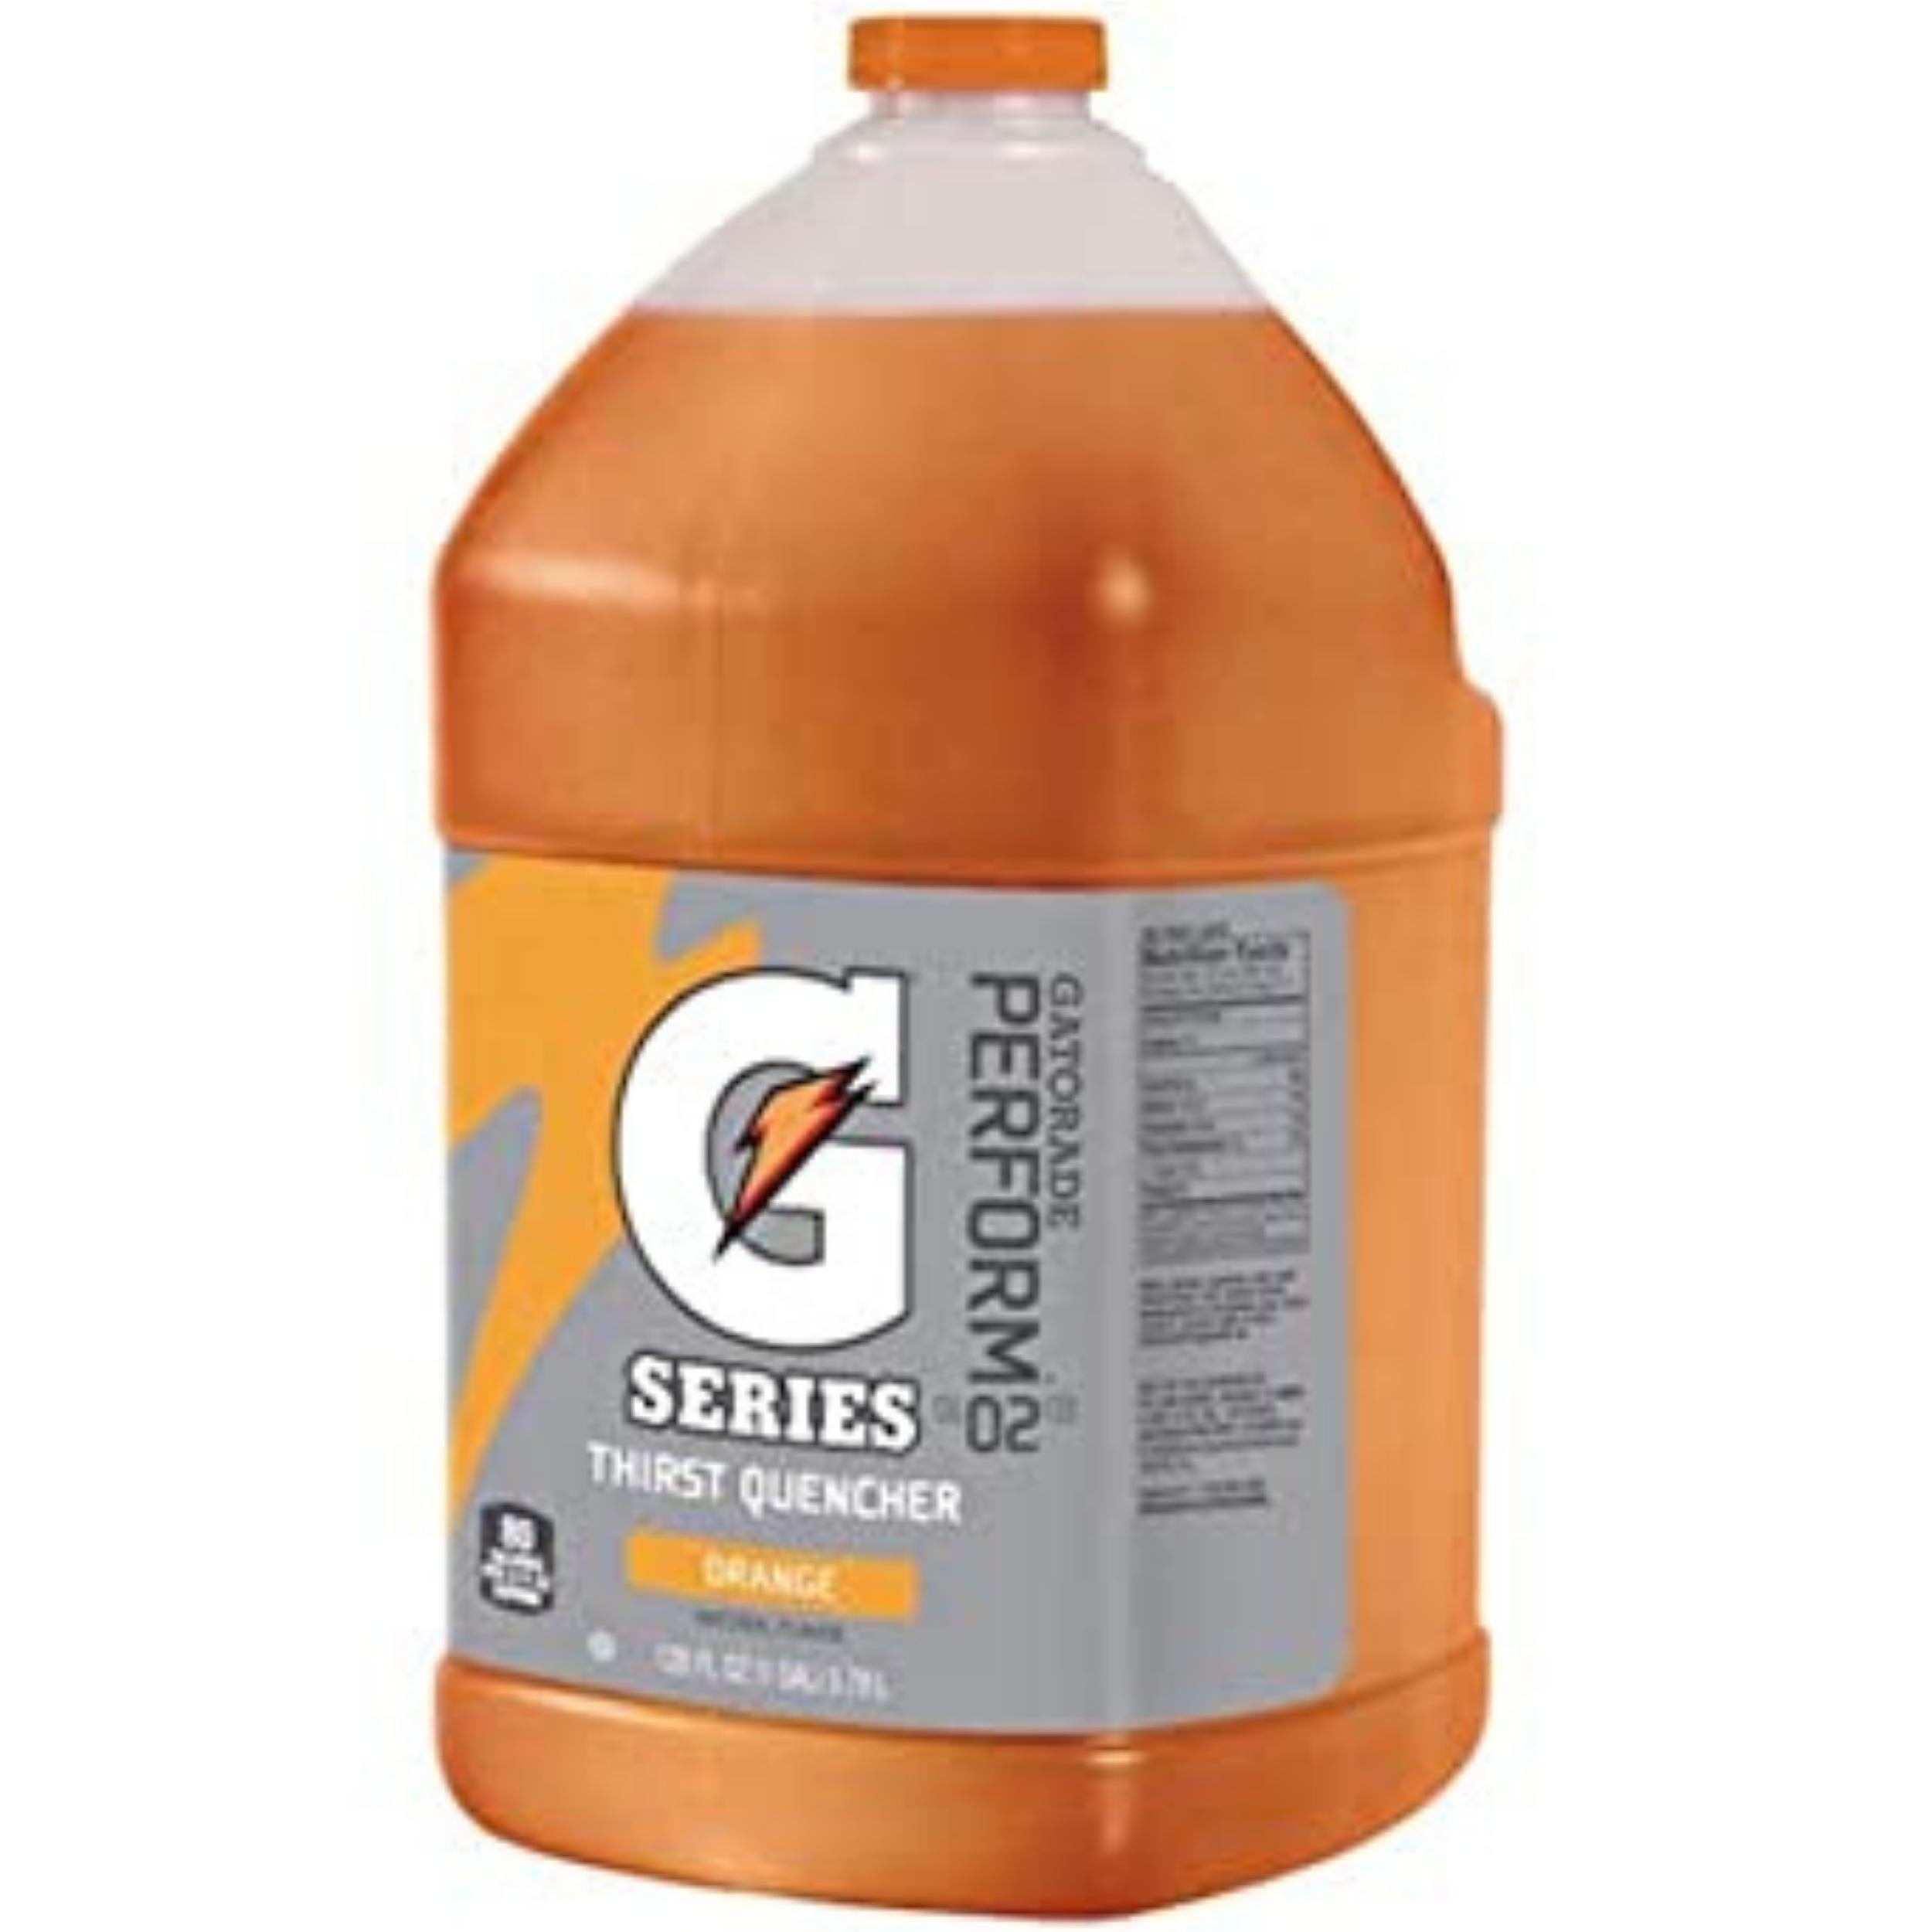 GATORADE- Fierce Thirst Quencher Instant Concentrate (MULTIPLE FLAVORS AVAILABLE) 4 PACK